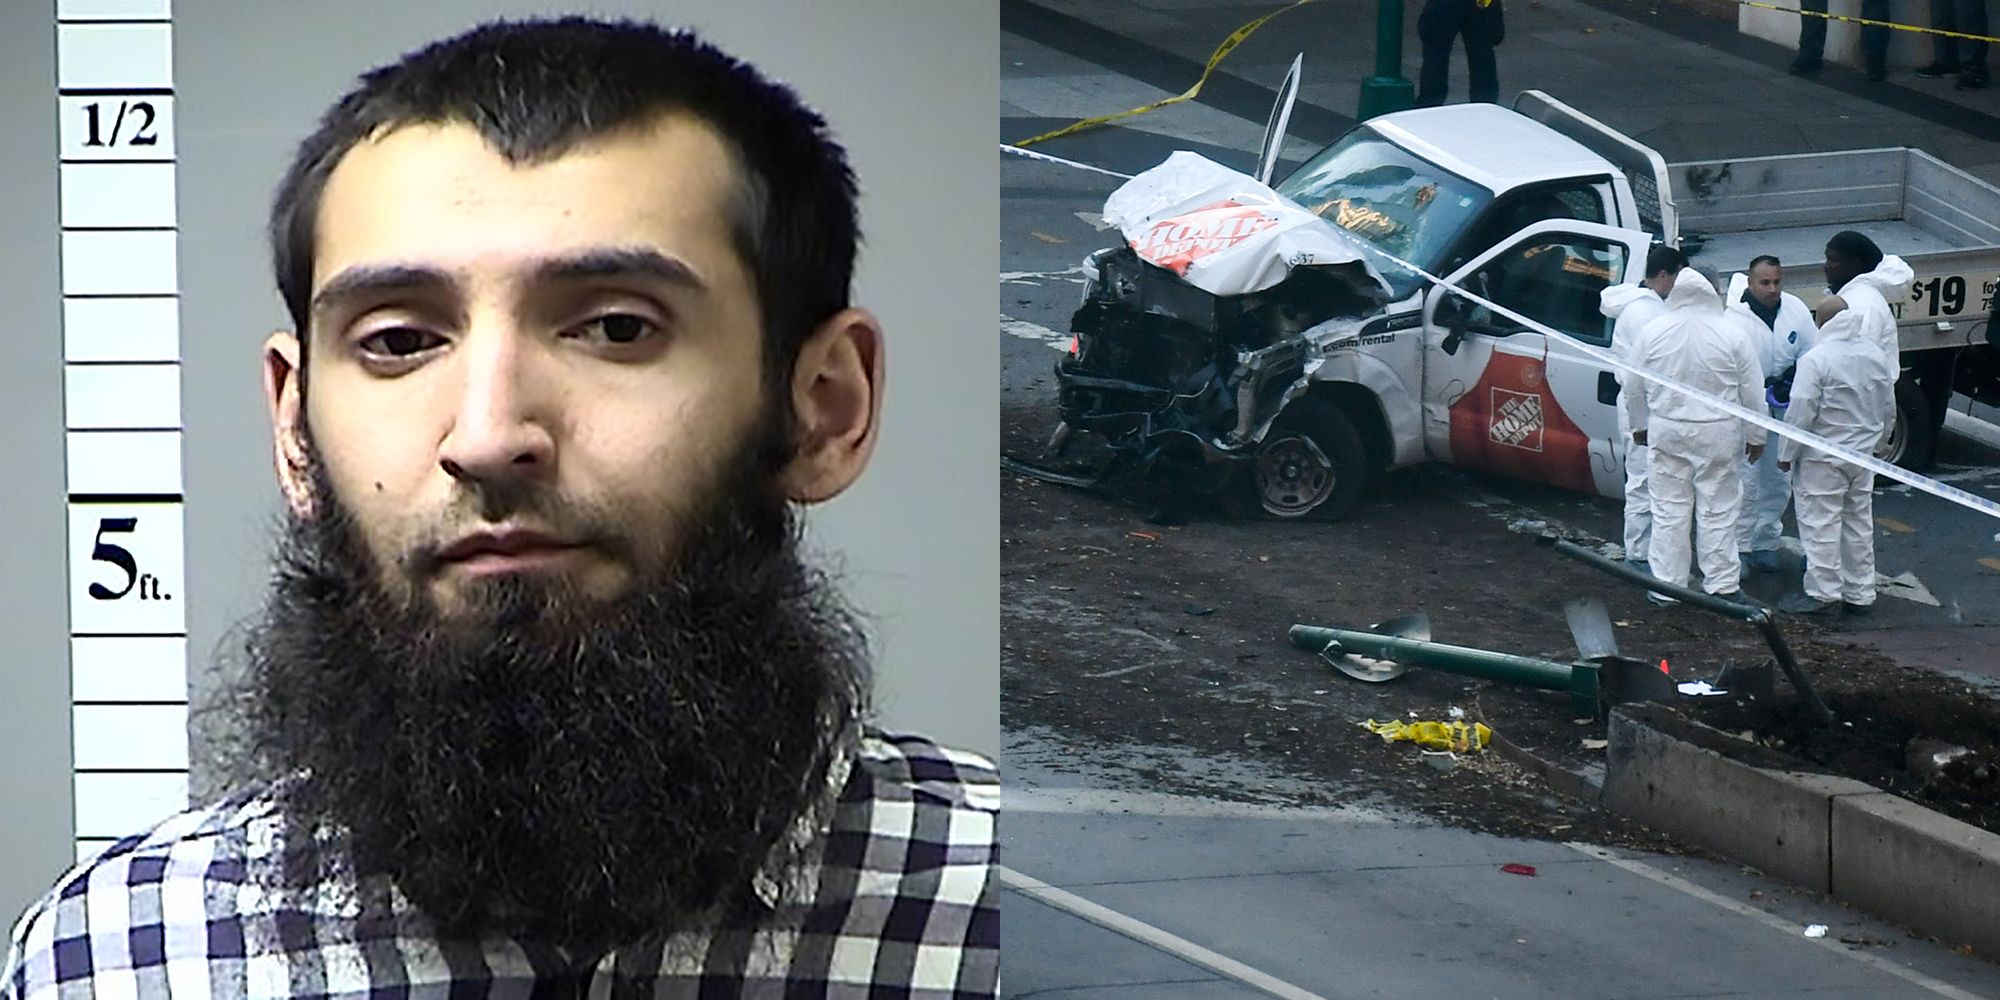 The New York terror attack suspect used to be an Uber driver